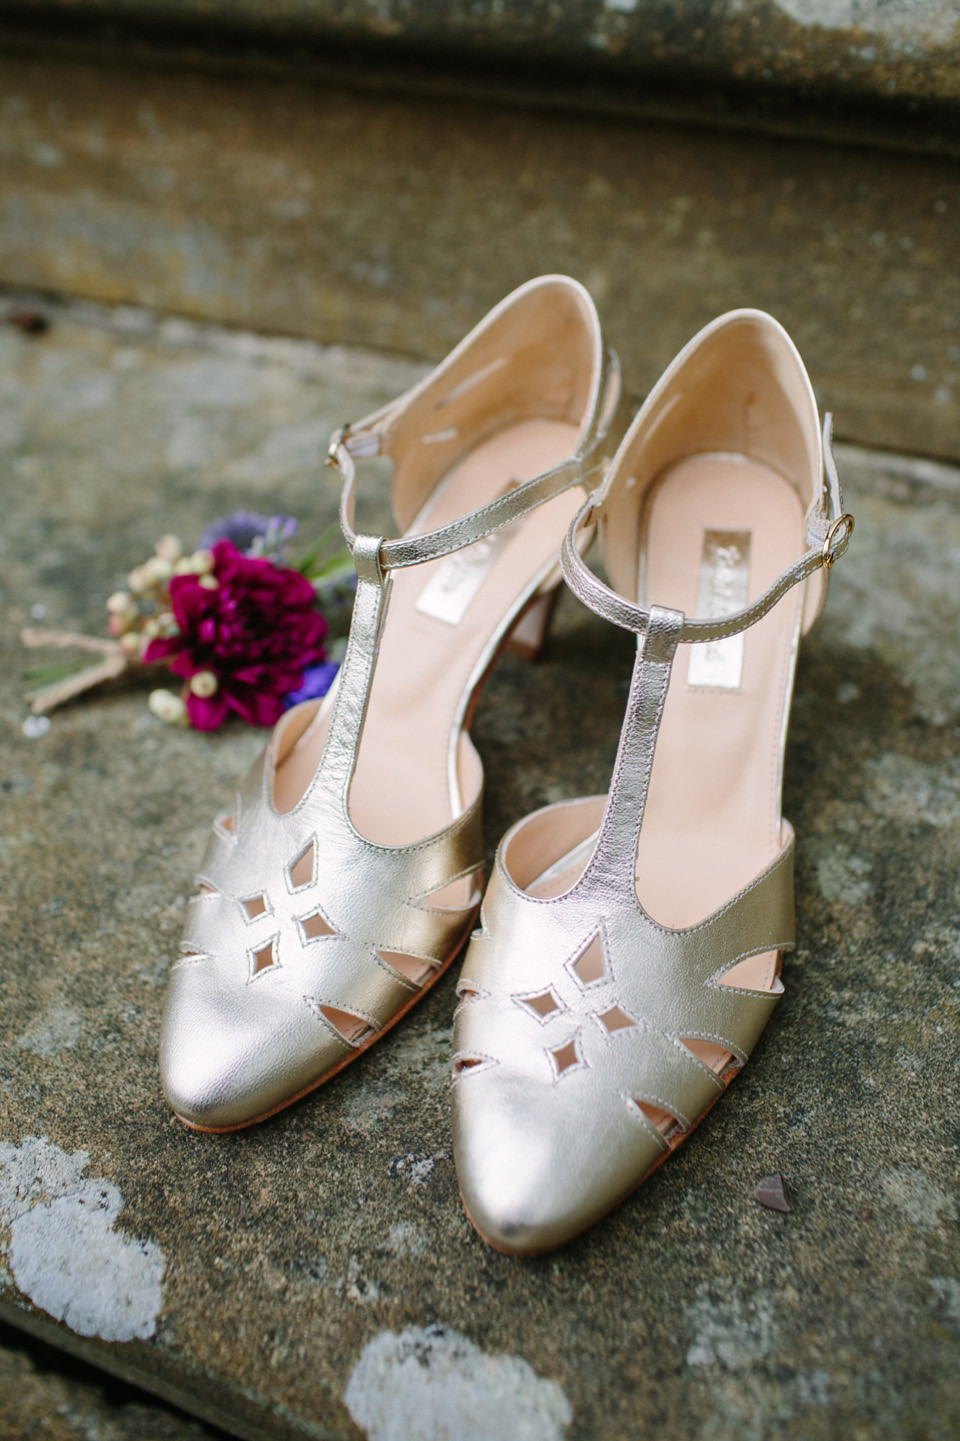 Retro Wedding Shoes
 Vintage Inspired Wedding Shoes From Rachel Simpson